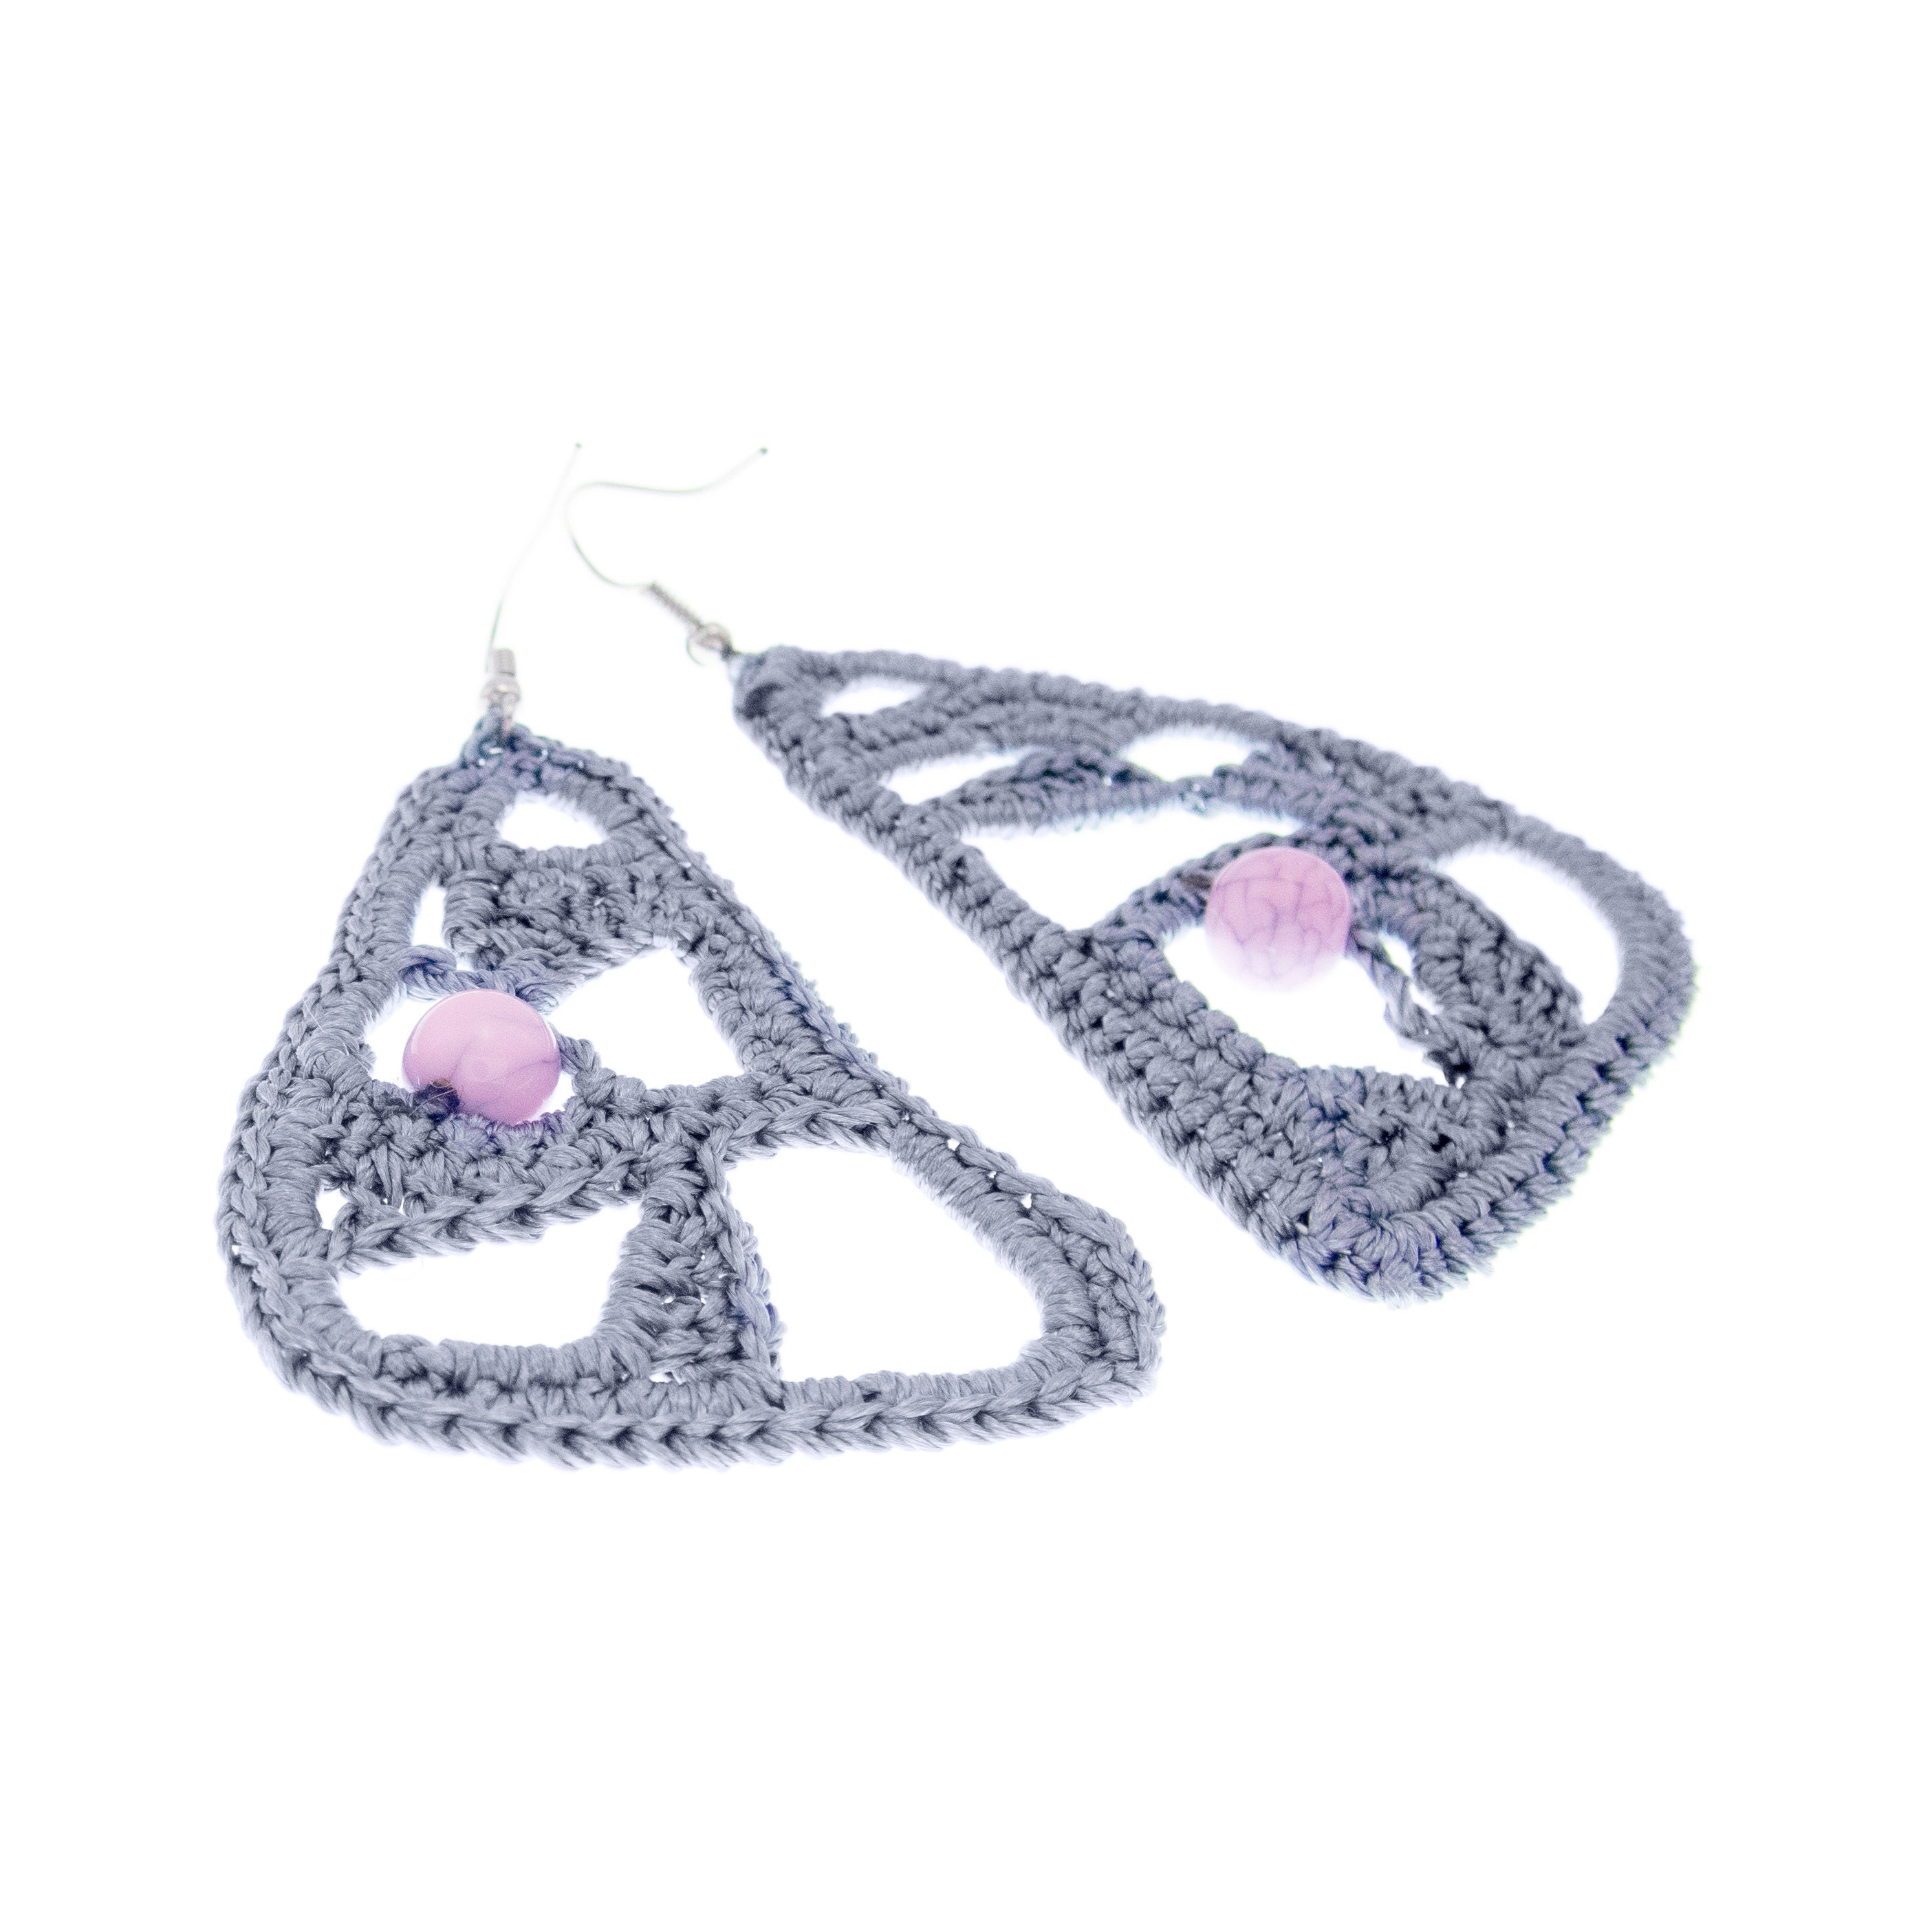 handmade lace earrings for a wedding with grey freeform triangles and pale pink bead